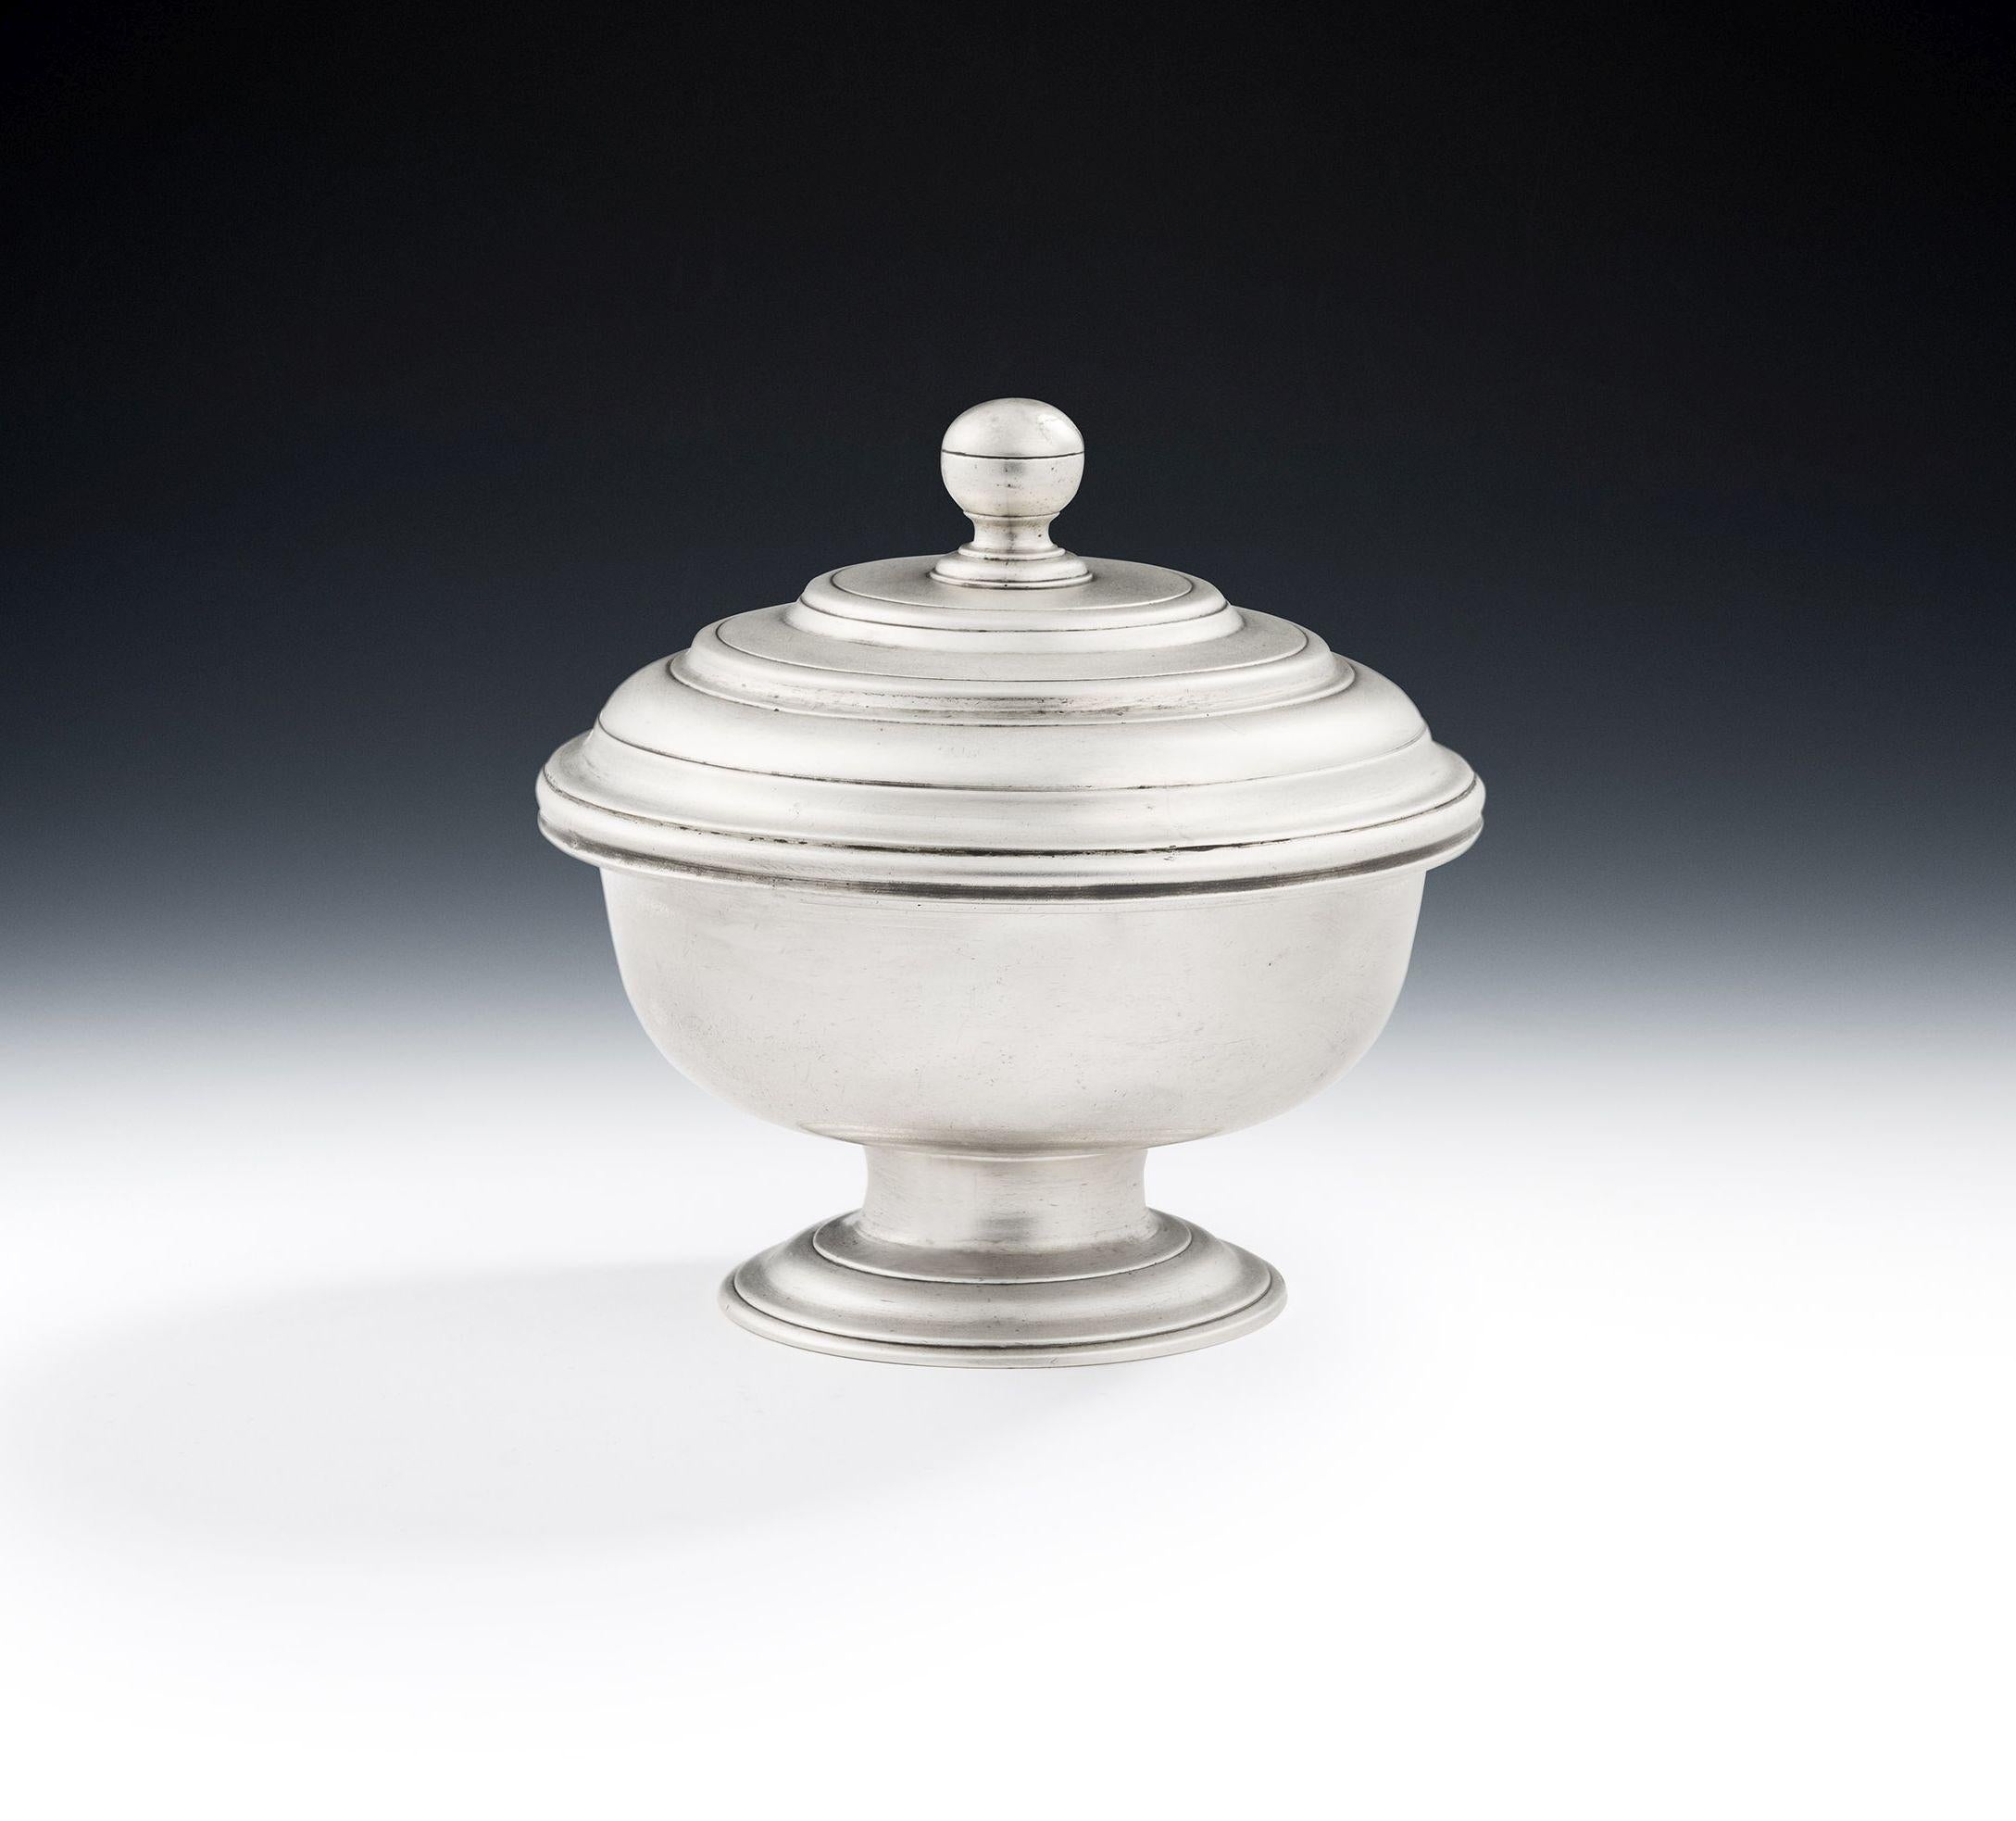 A Very Rare and Unusual George II Bowl and Cover Made in London in 1746 by Gabriel Sleath.

The Bowl is modelled in a very unusual design and stands on a spreading pedestal foot decorated with reeded bands.  The shallow circular main body has a